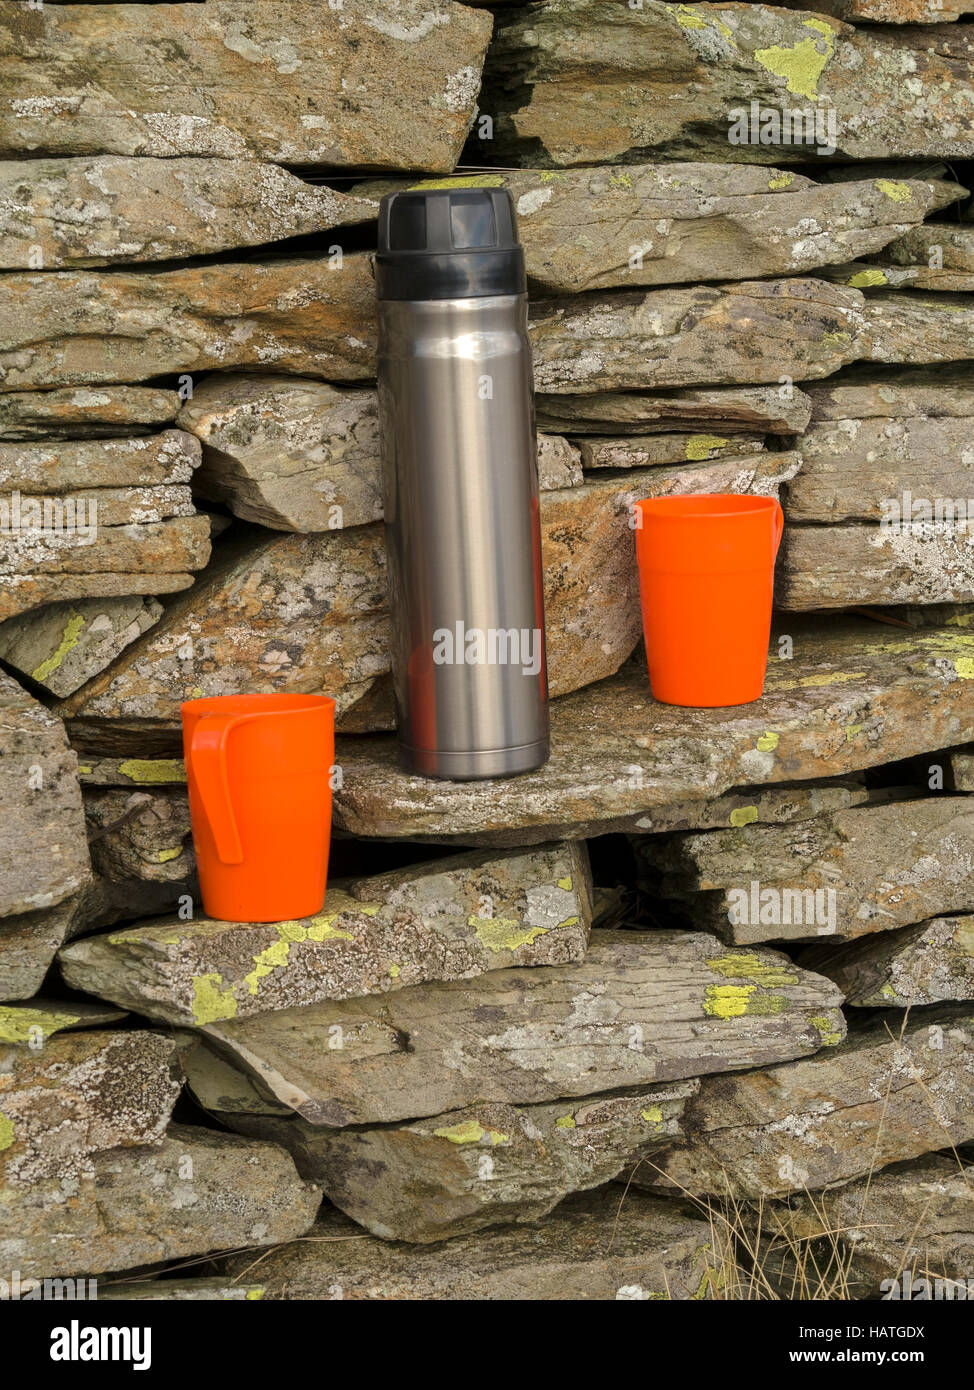 Stainless steel thermos flask and two orange plastic cups on dry stone wall. Stock Photo